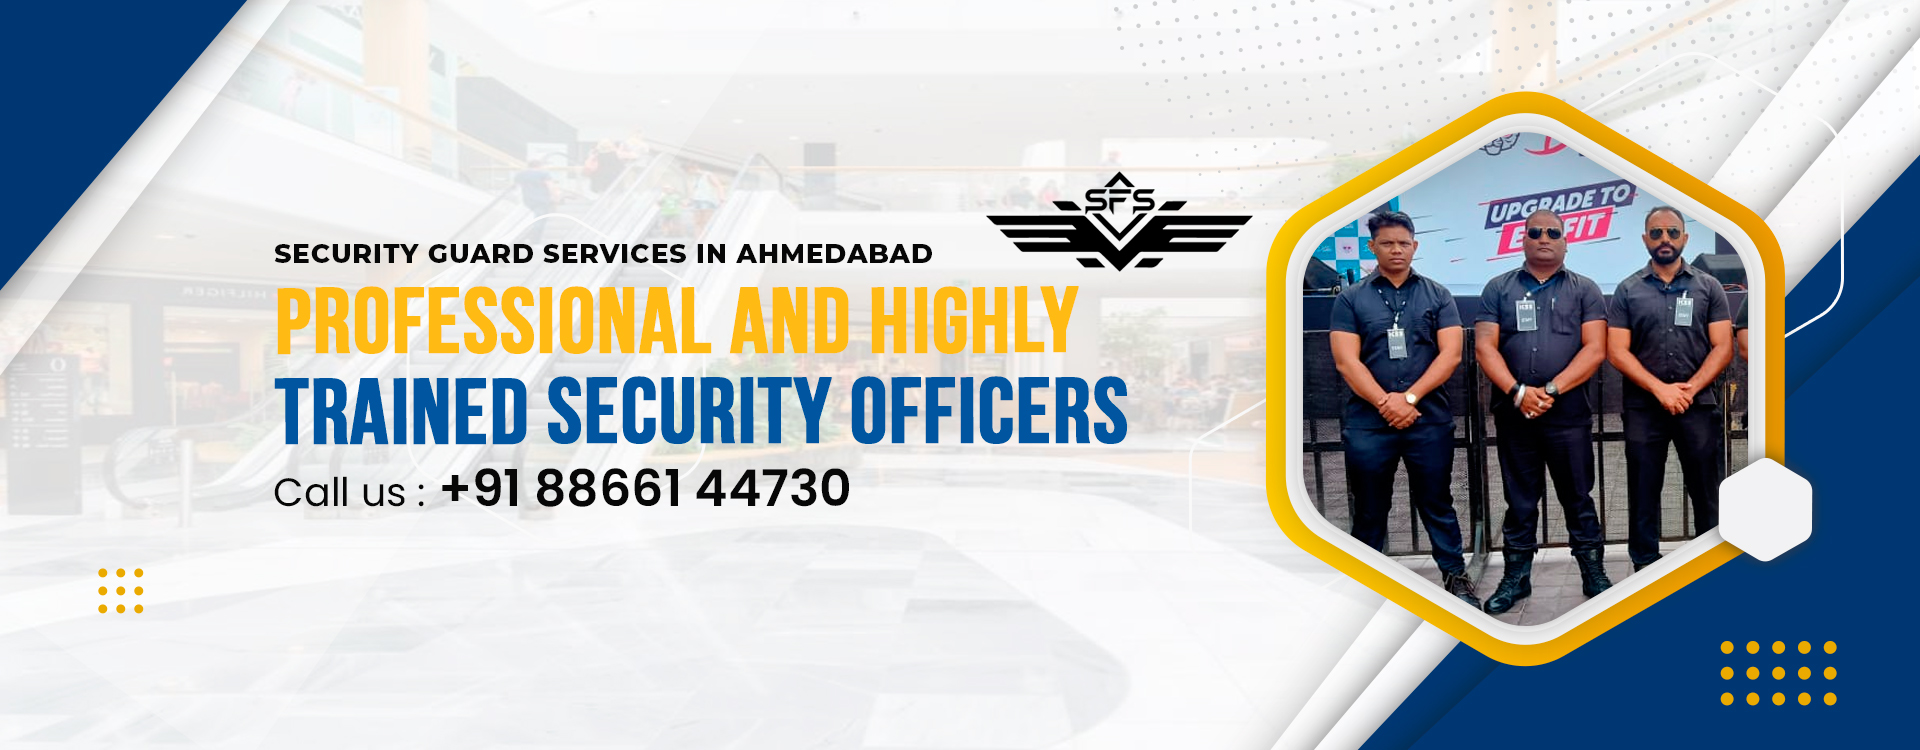 Bouncer Guard Services in Ahmedabad